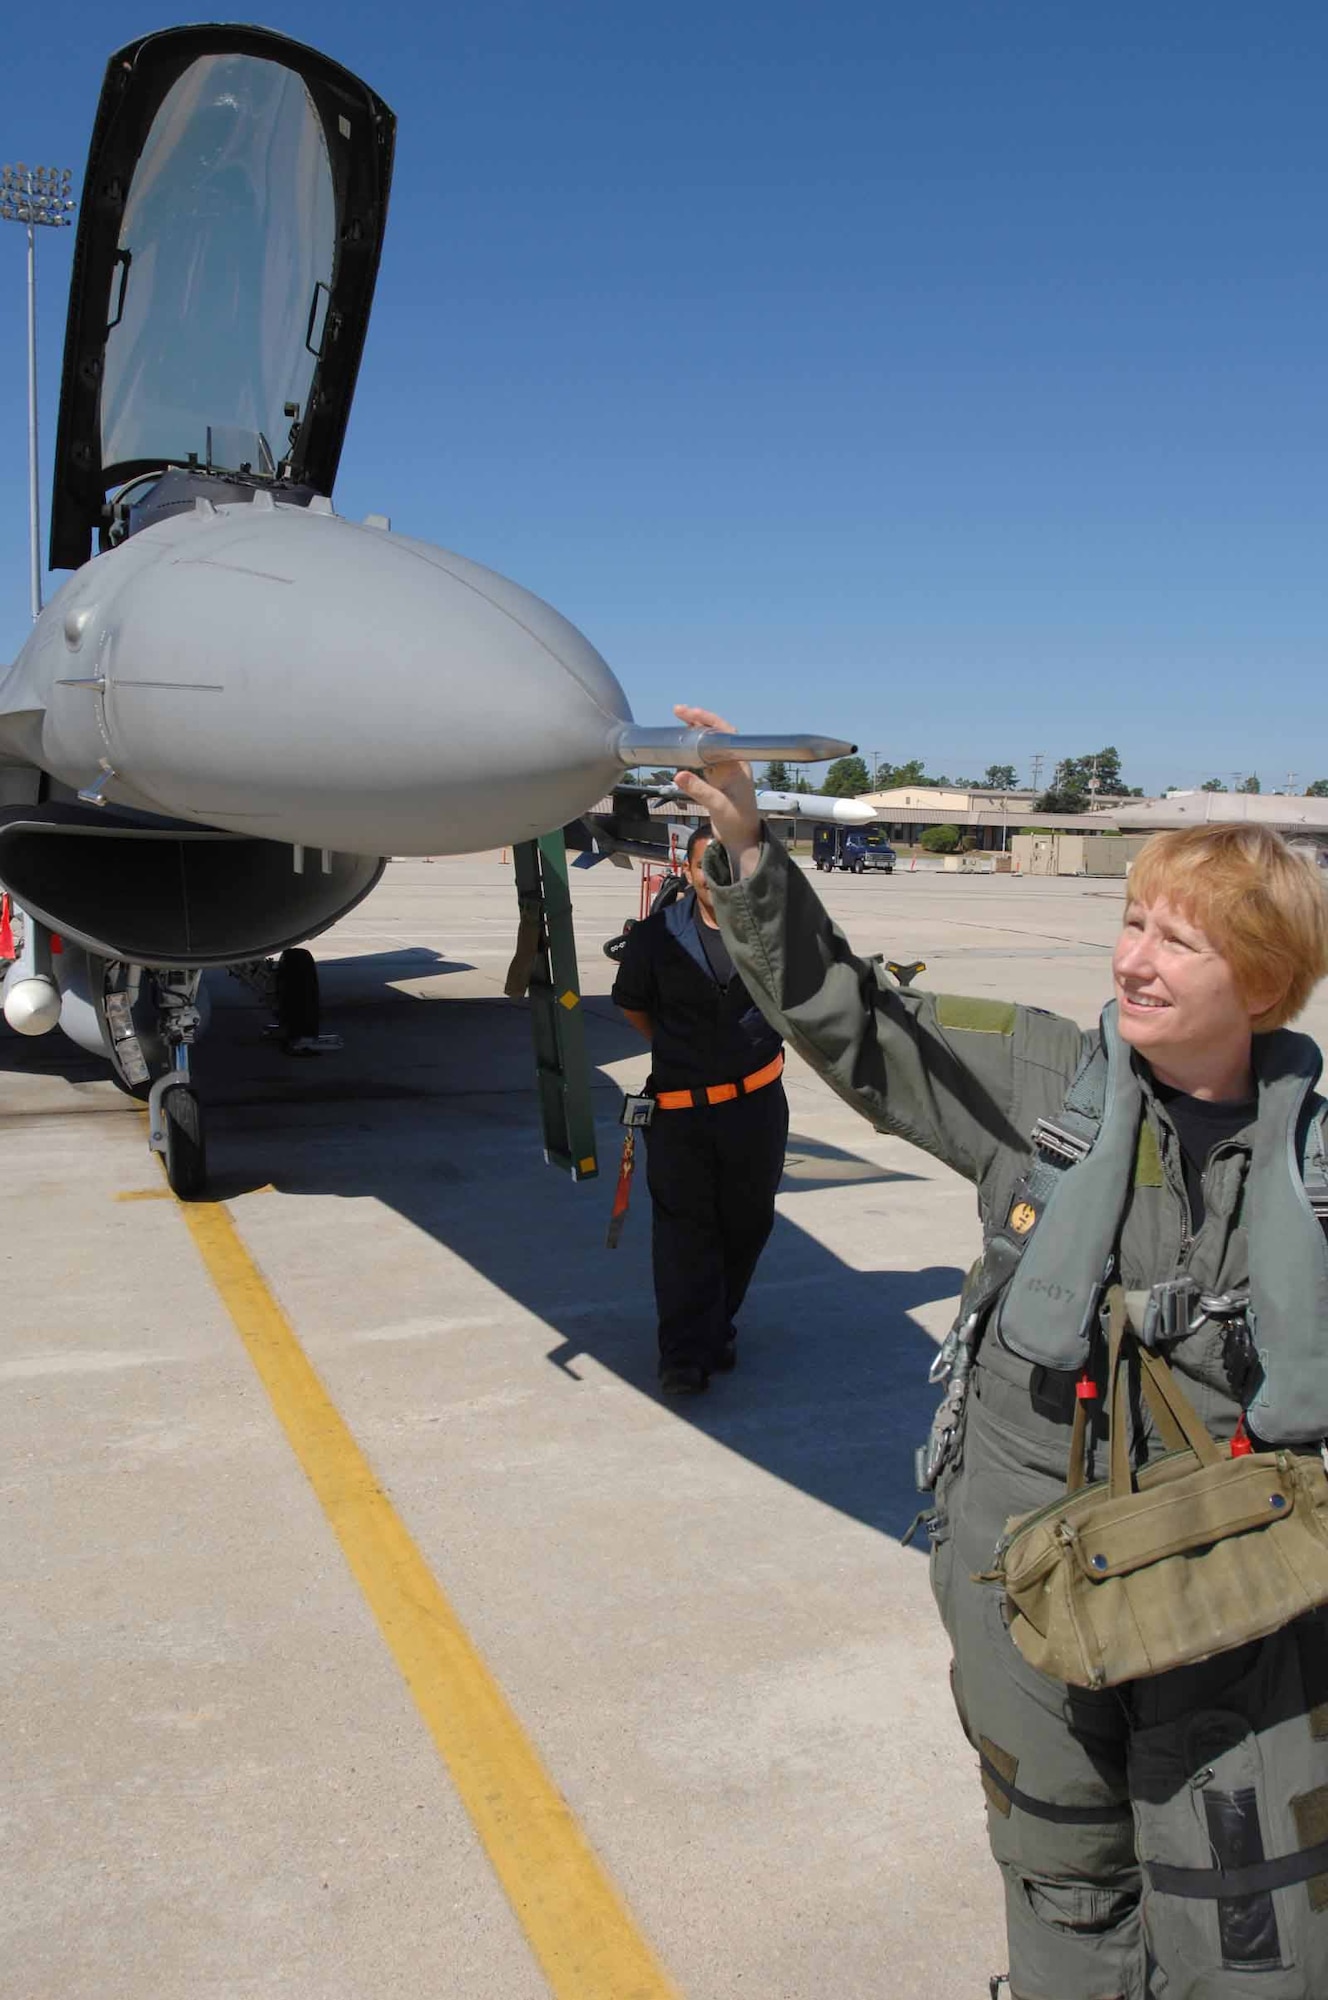 Lt. Col. Sharon Preszler, 20th Fighter Wing staff director and Commander's Action Group director, prepares for her fini flight Thursday at Shaw. Col. Preszler was the first female active-duty fighter pilot. (U.S. Air Force photo/Staff Sgt. Josef Cole III)